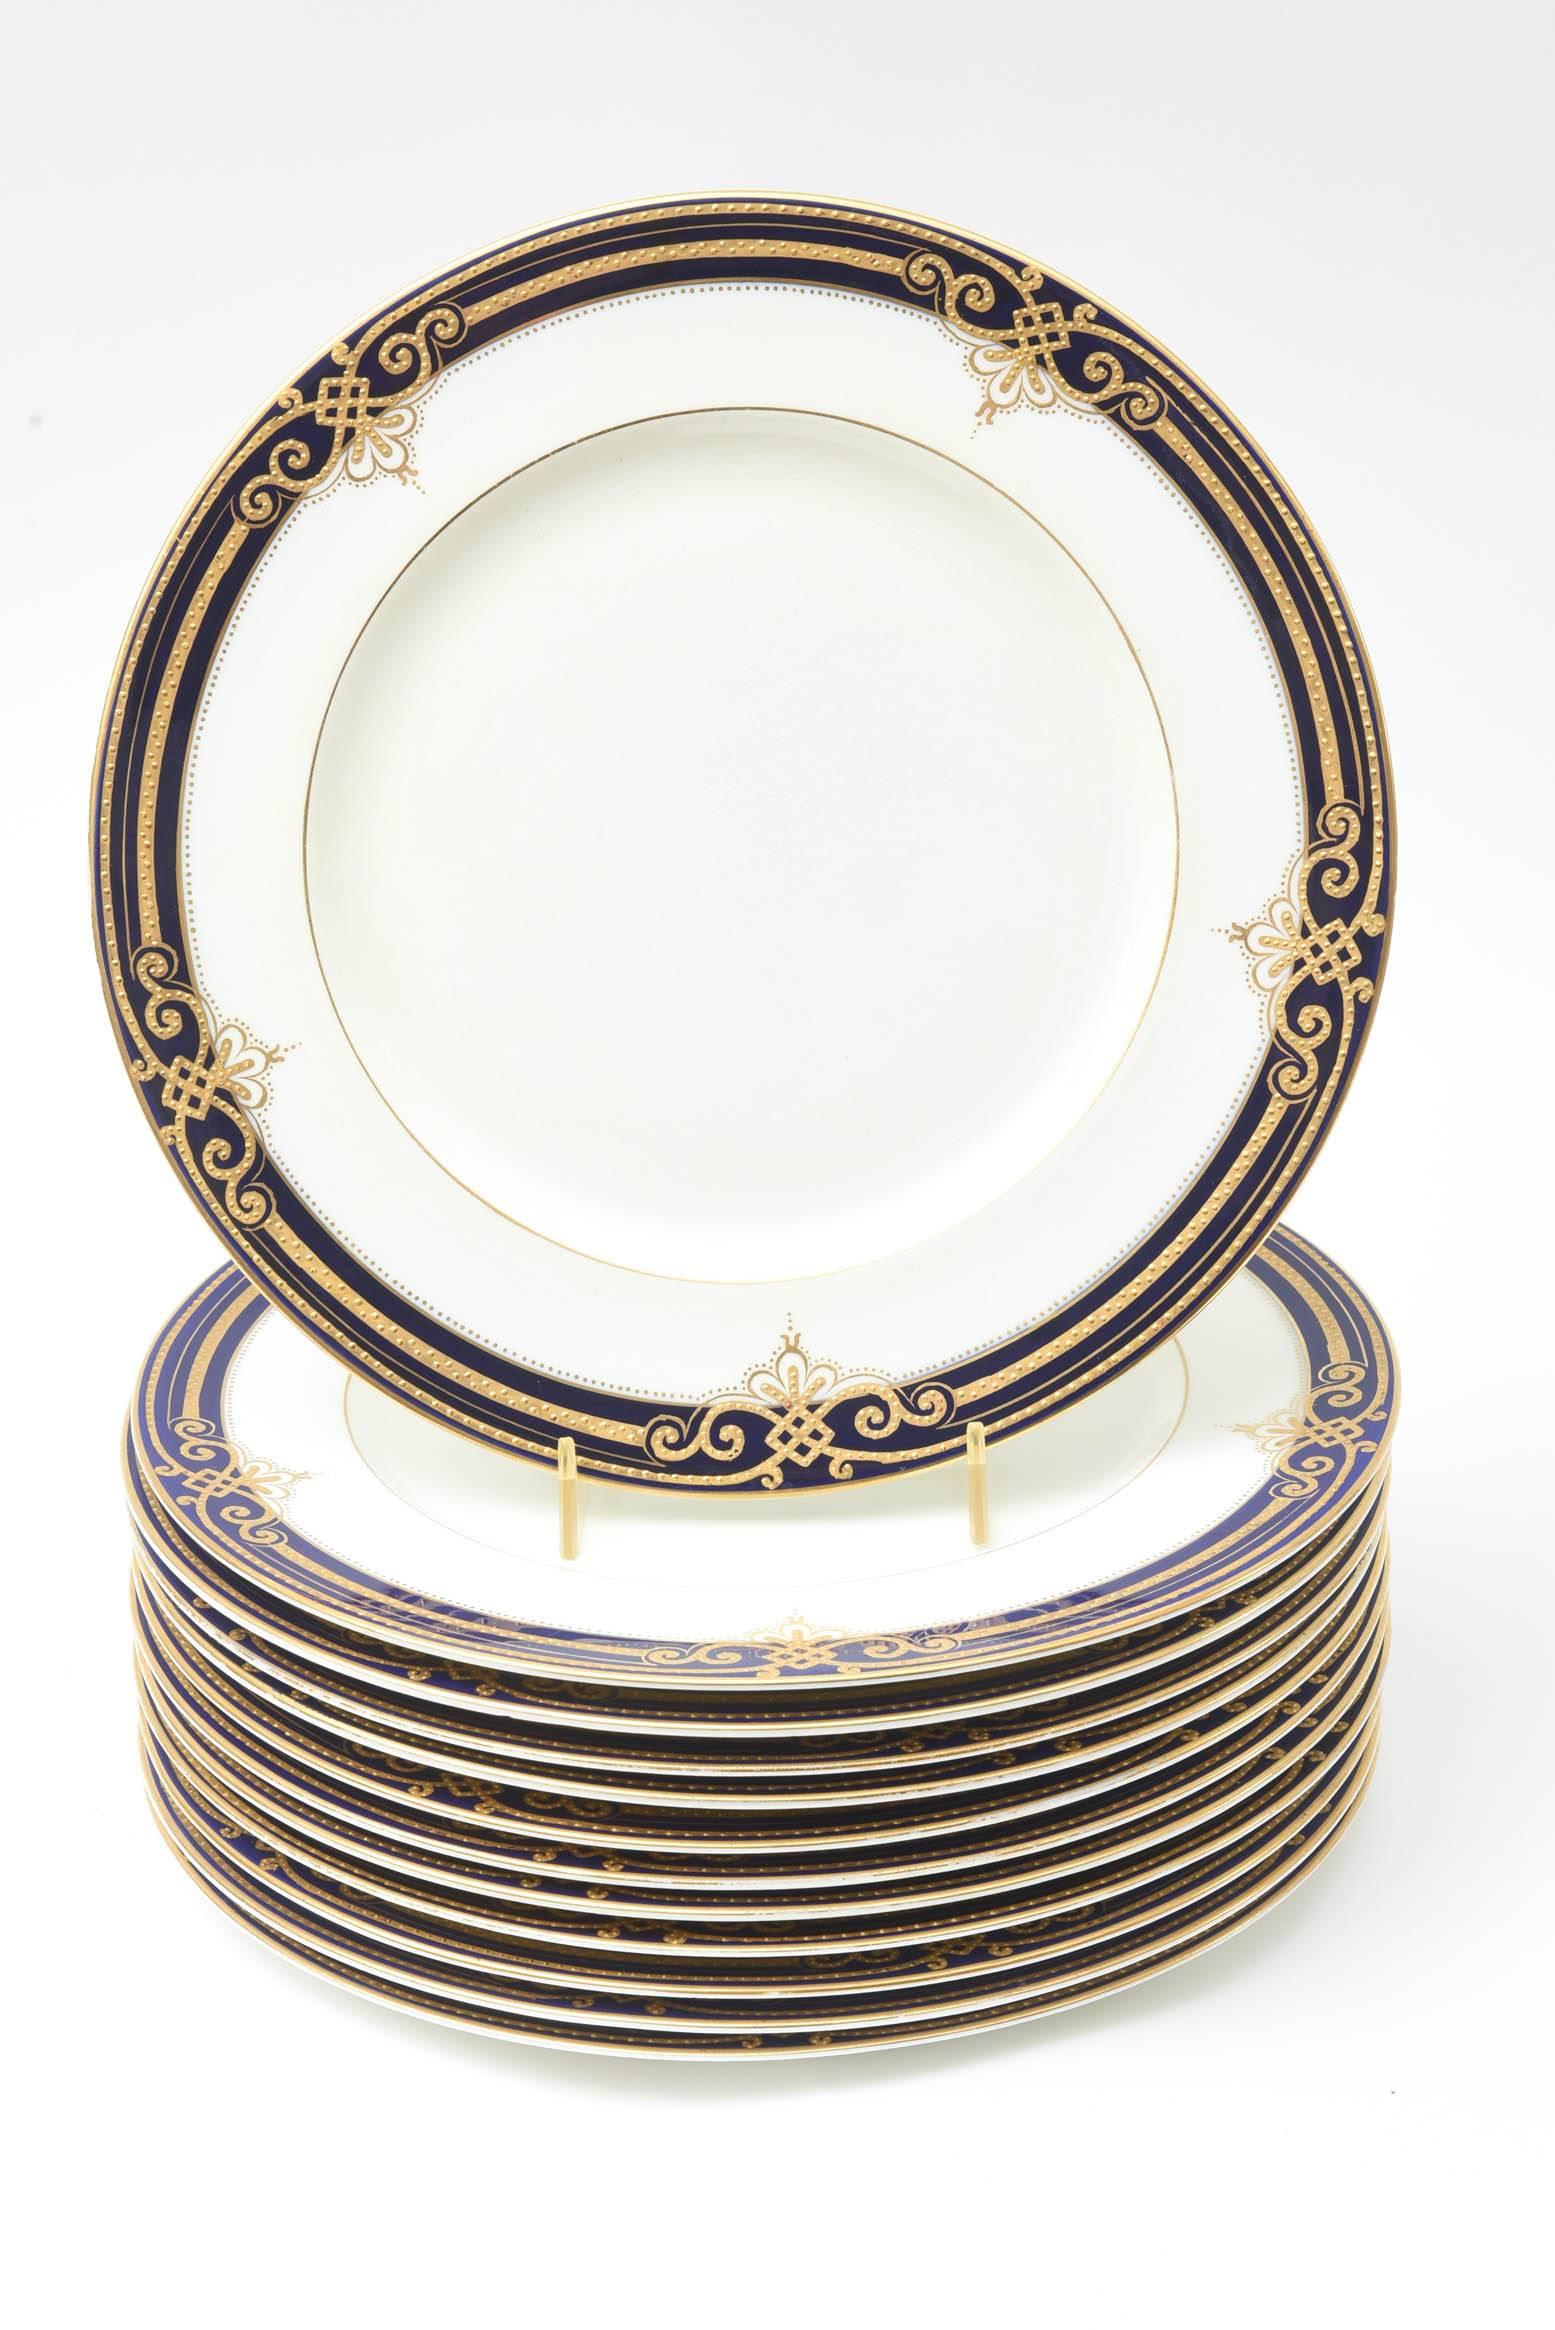 12 fine porcelain dinner plates from George Jones, England and custom ordered through the fine retailers of Ryrie Brothers, Toronto. Crisp white ground with an intricate design on its collar with very detailed raised tooled gilding along with the